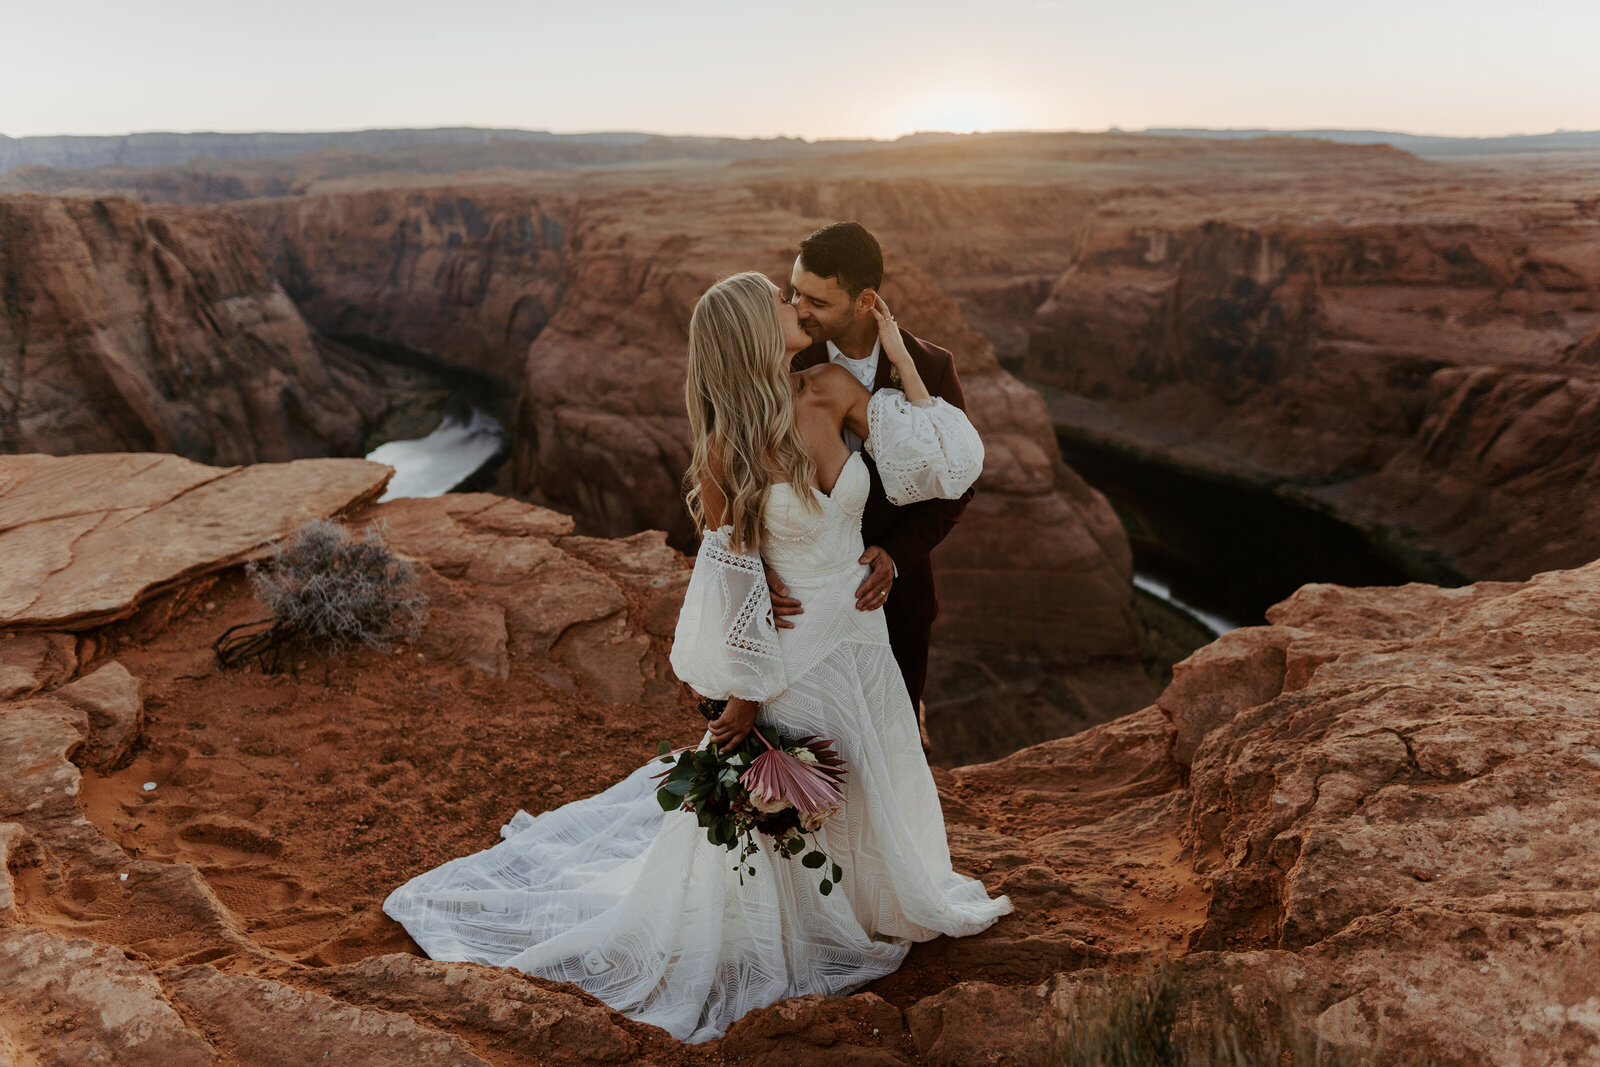 Bride and groom in boho wedding attire kissing on the cliffs in front of Horseshoe Bend, Arizona